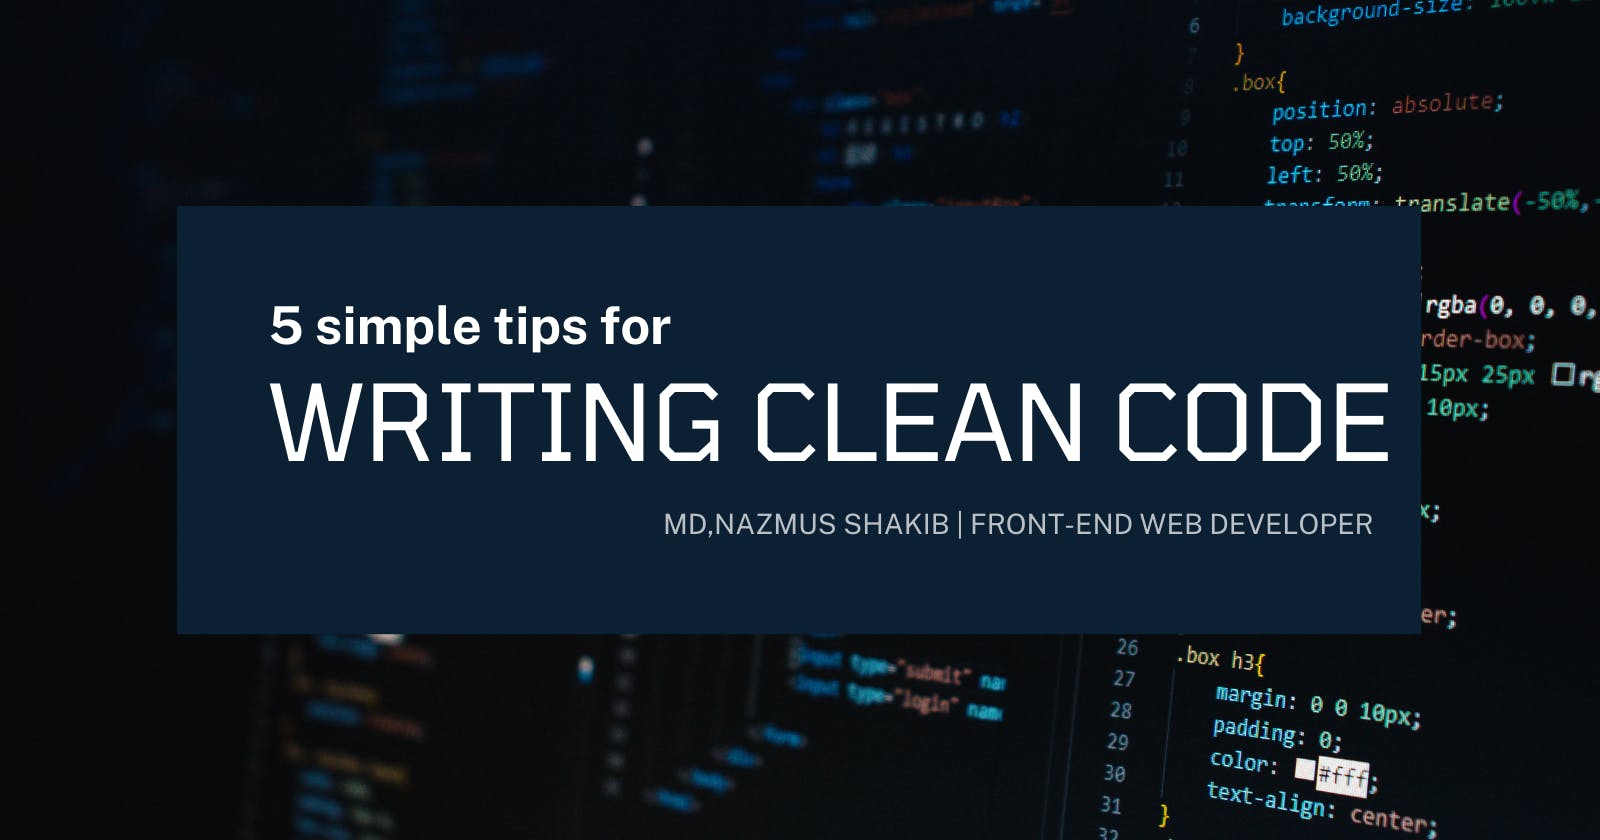 5 simple tips for writing clean code